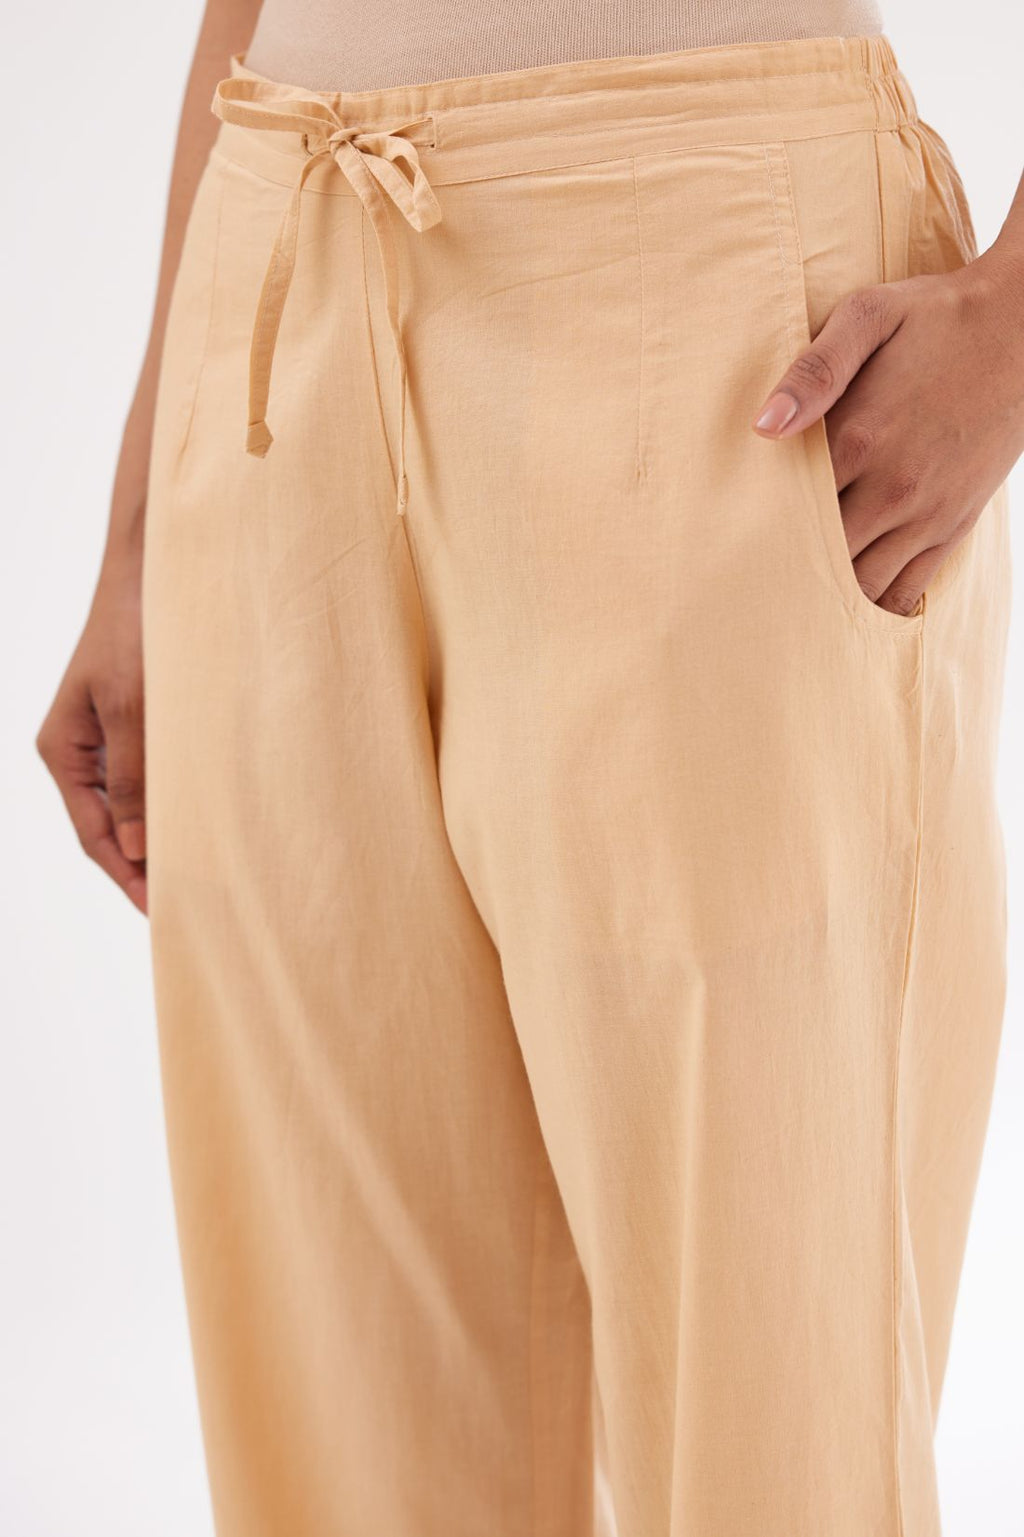 Peach cotton straight pants with appliqué and hand attached sequins detailing at bottom hem.